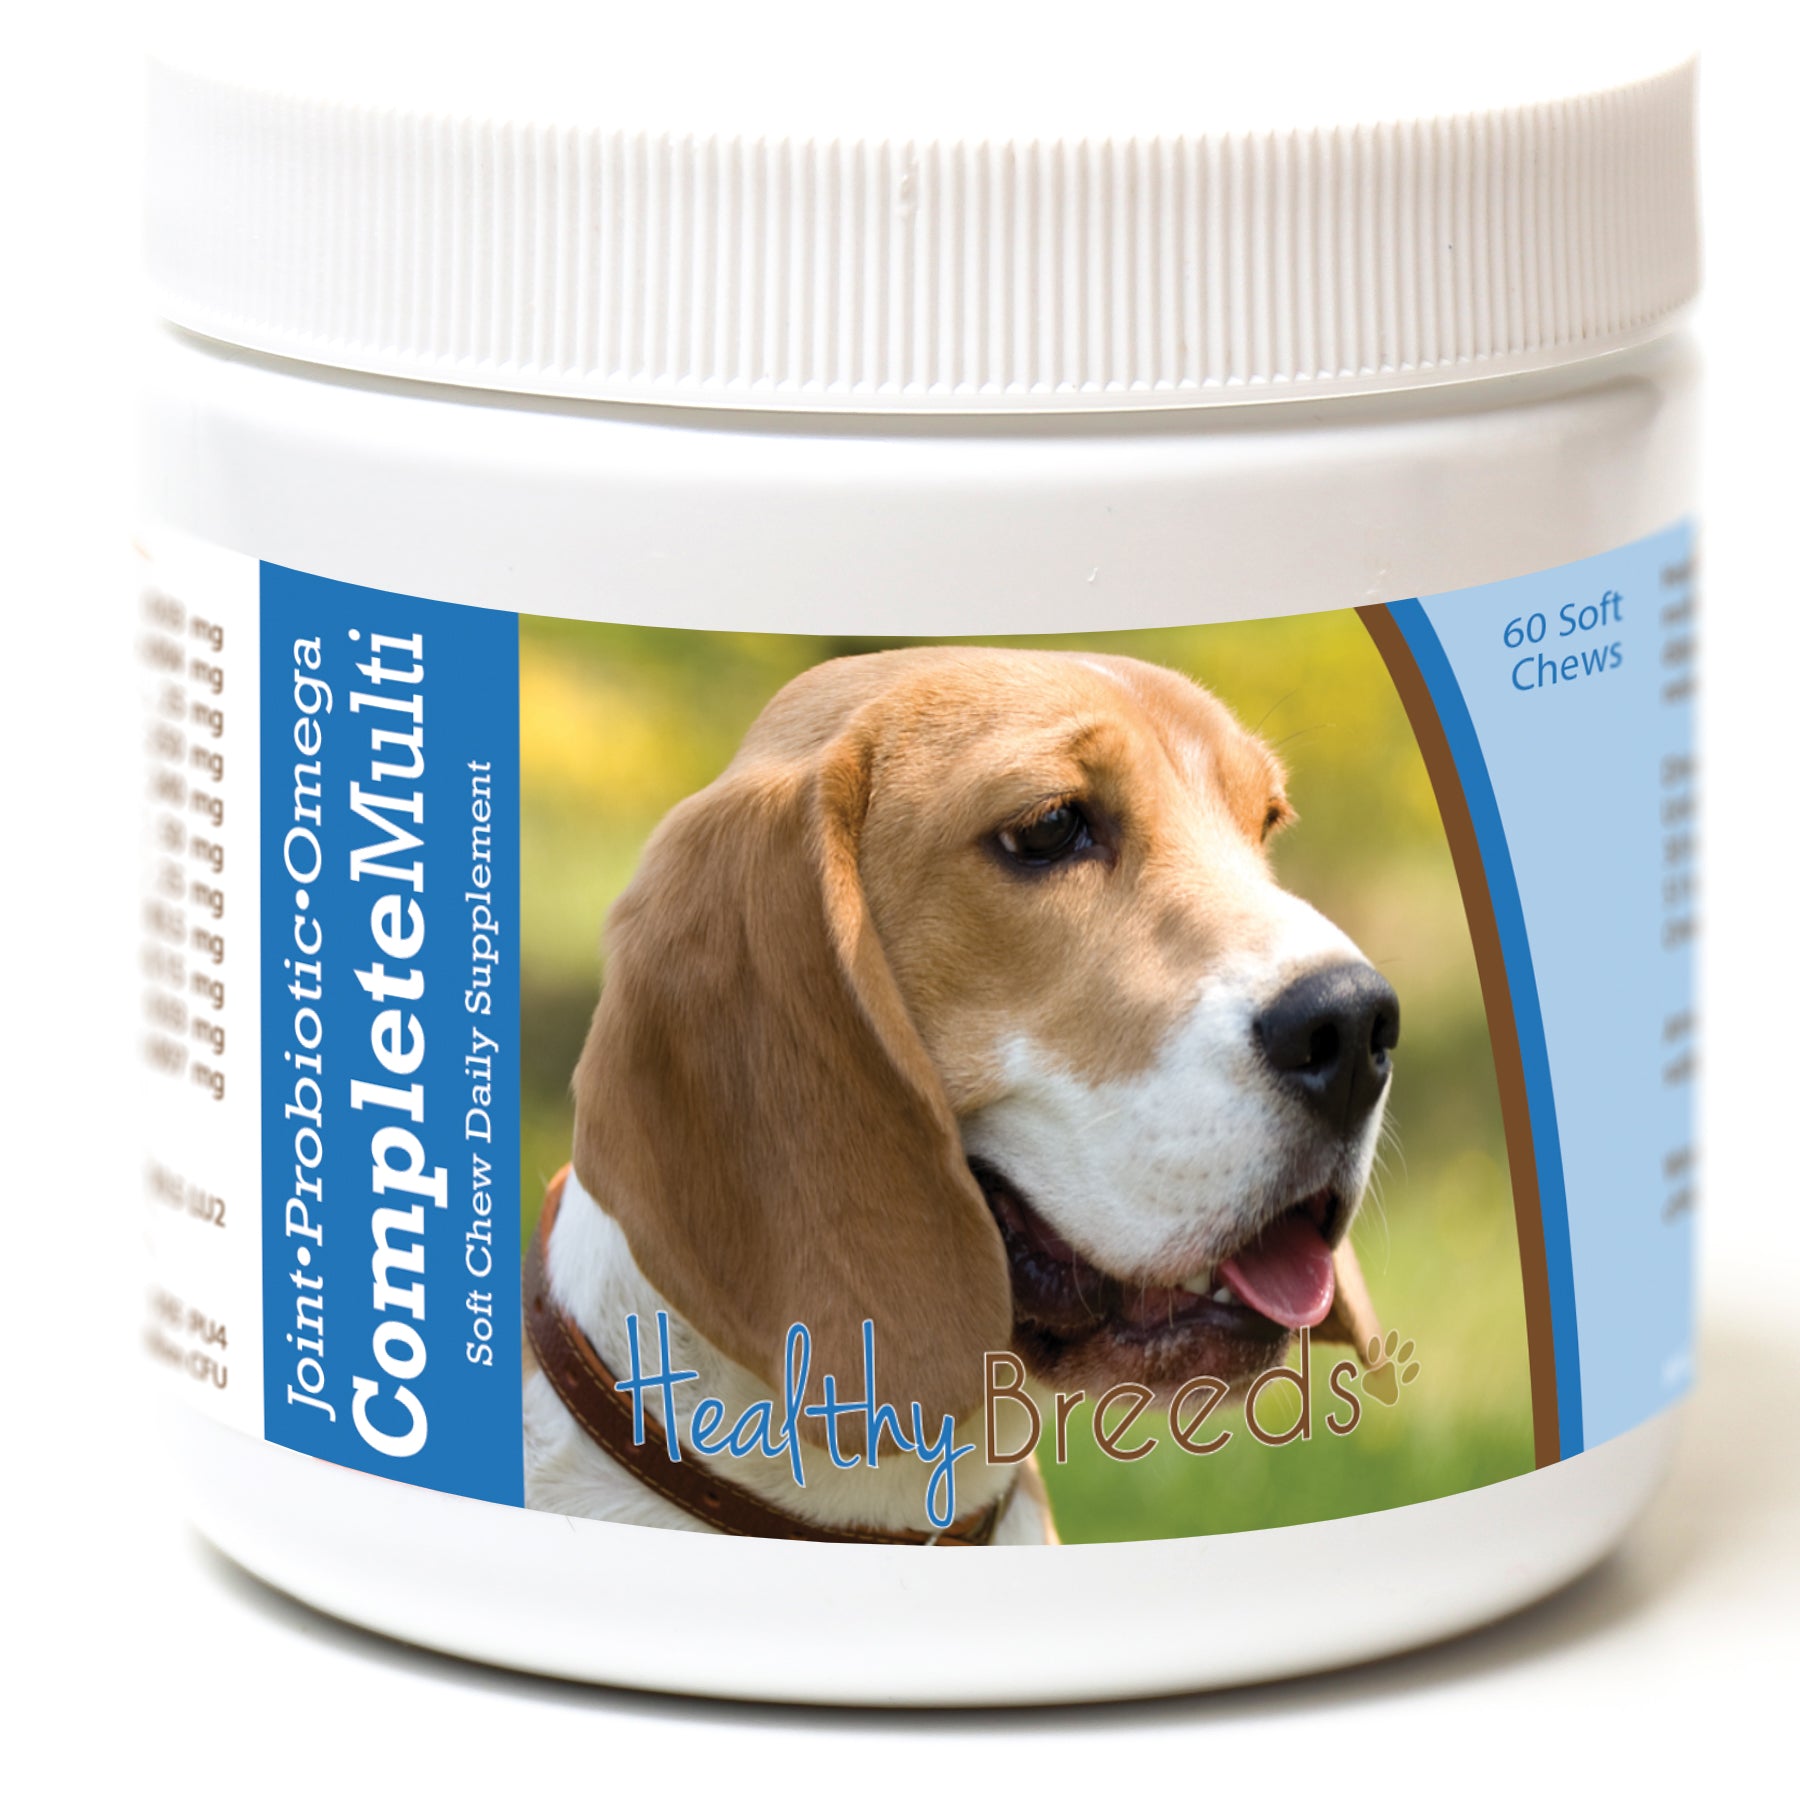 Healthy Breeds Beagle All In One Multivitamin Soft Chew 60 Count